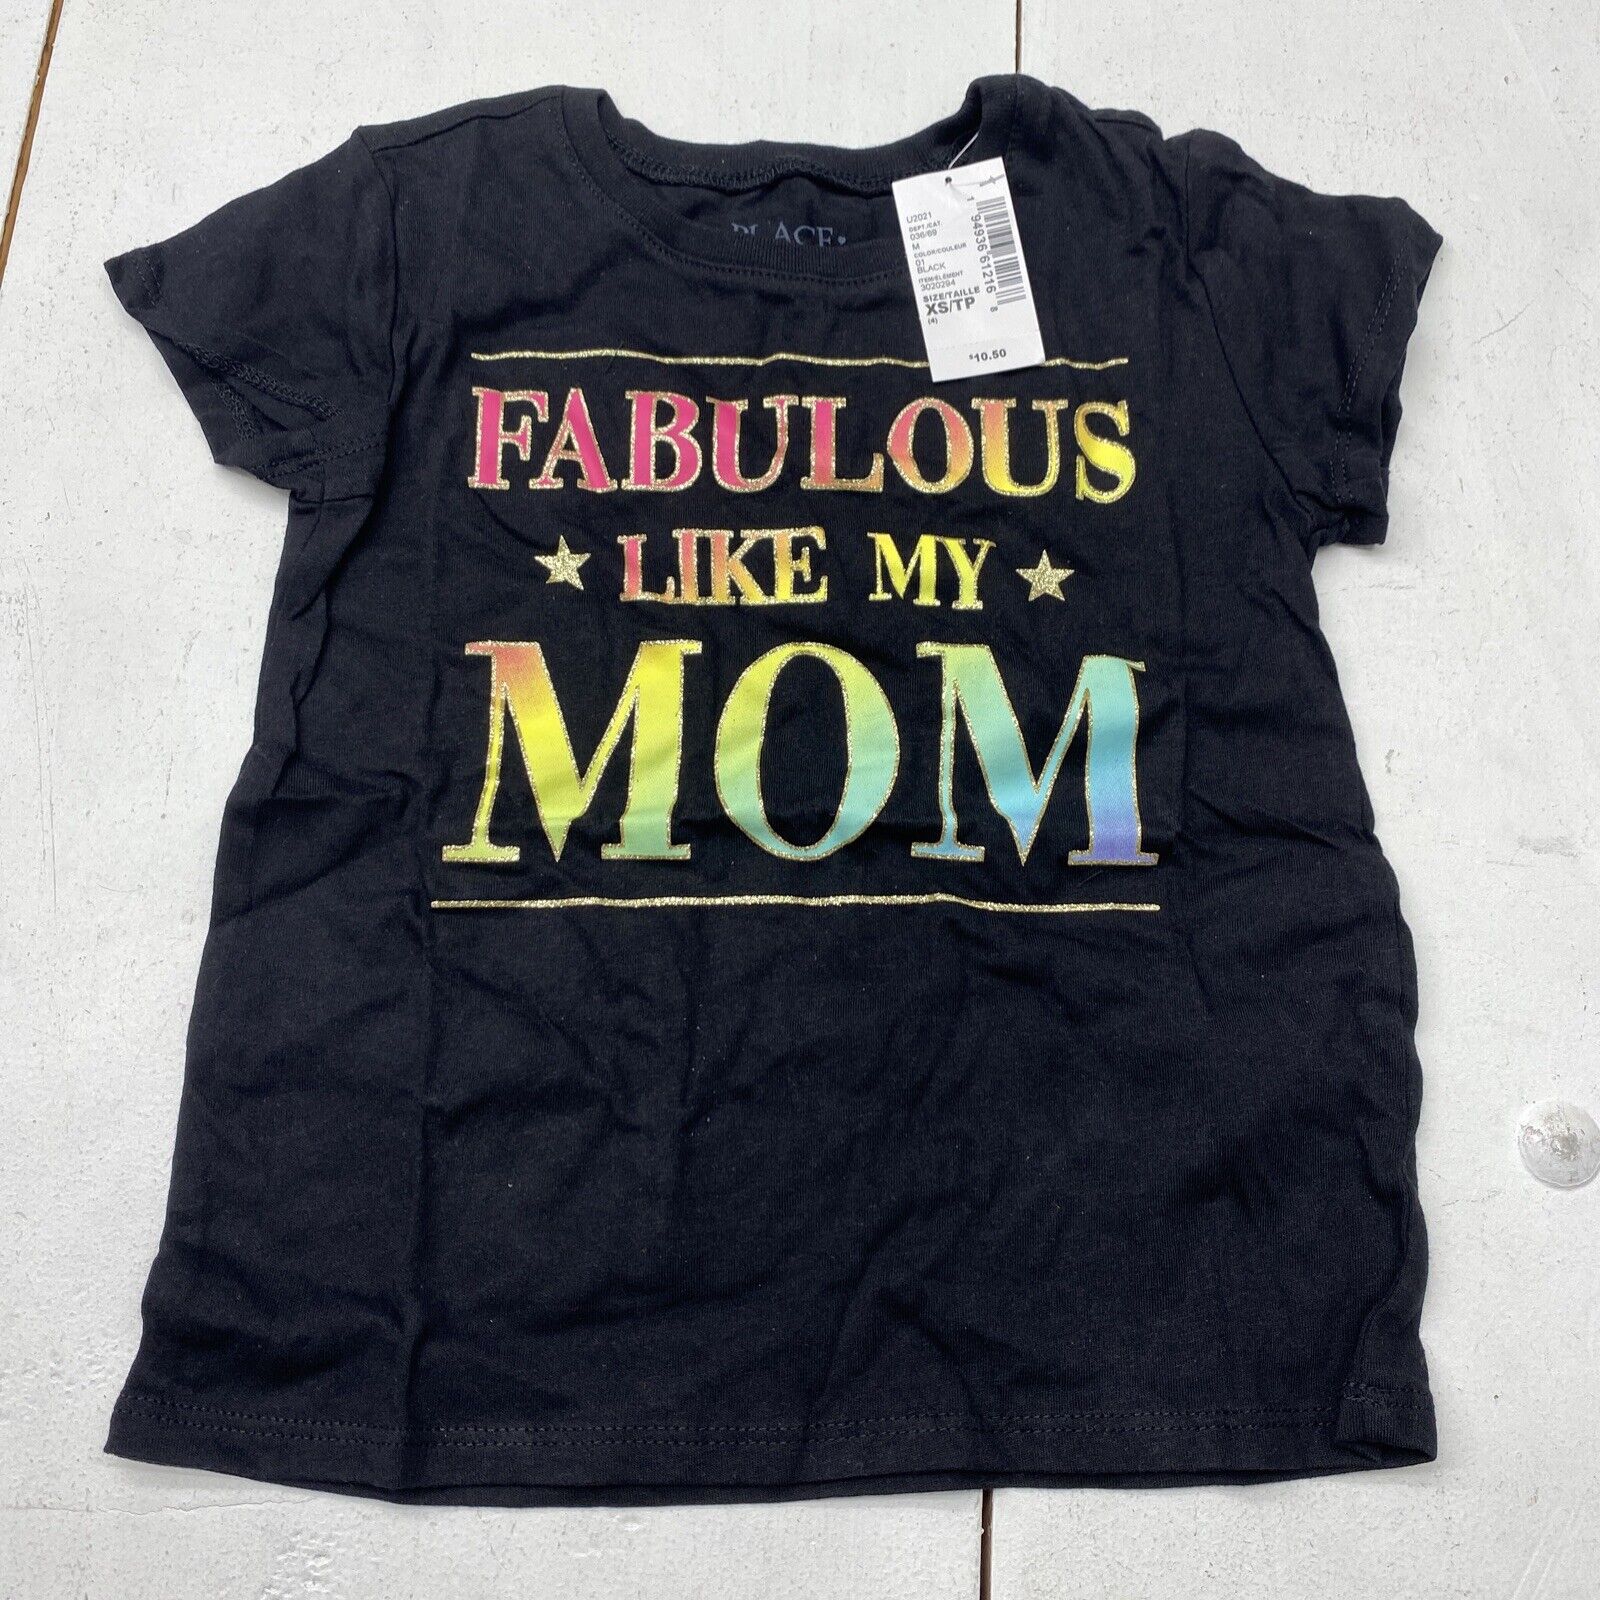 The Childrens Place Fabulous Like My Mom Black S/S Shirt Toddler Size XS(4) New